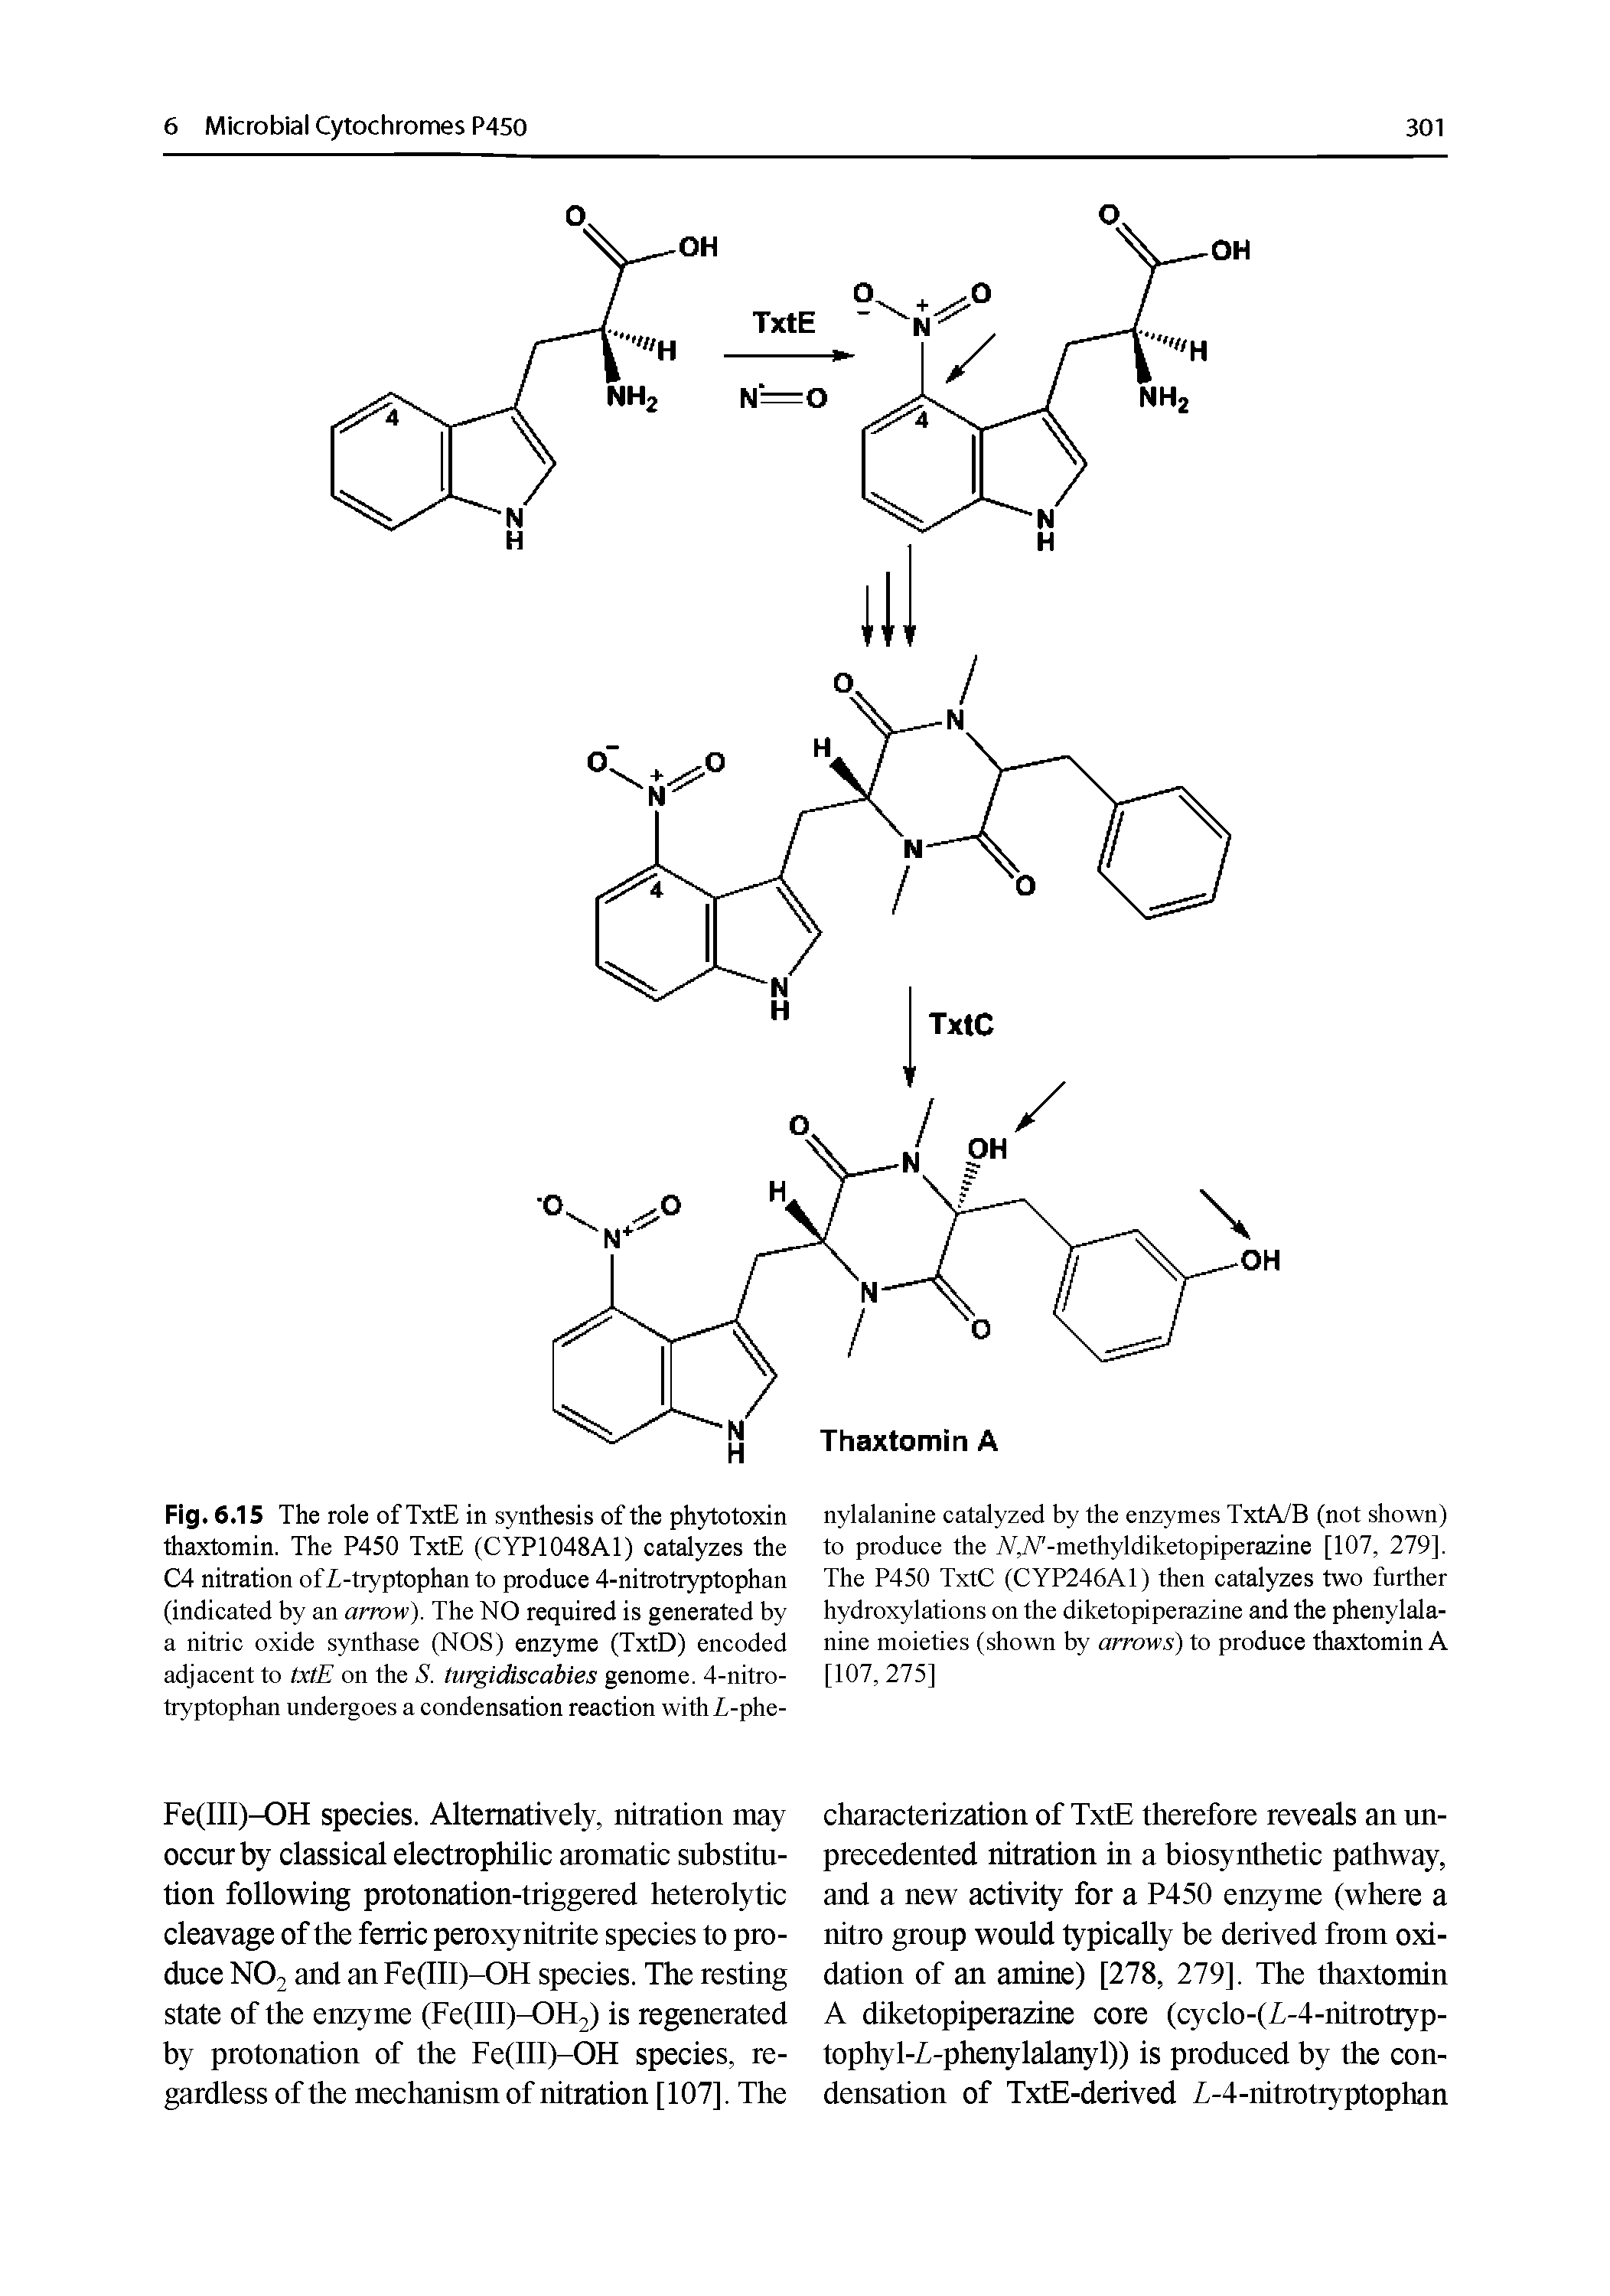 Fig. 6.15 The role of TxtE in synthesis of the phytotoxin thaxtomin. The P450 TxtE (CYP1048A1) catalyzes the C4 nitration ofl-tryptophan to produce 4-nitrotryptophan (indicated by an arrow). The NO required is generated by a nitric oxide synthase (NOS) enzyme (TxtD) encoded adjacent to txtE on the S. turgidiscabies genome. 4-nitro-tryptophan undergoes a condensation reaction withi-phe-...